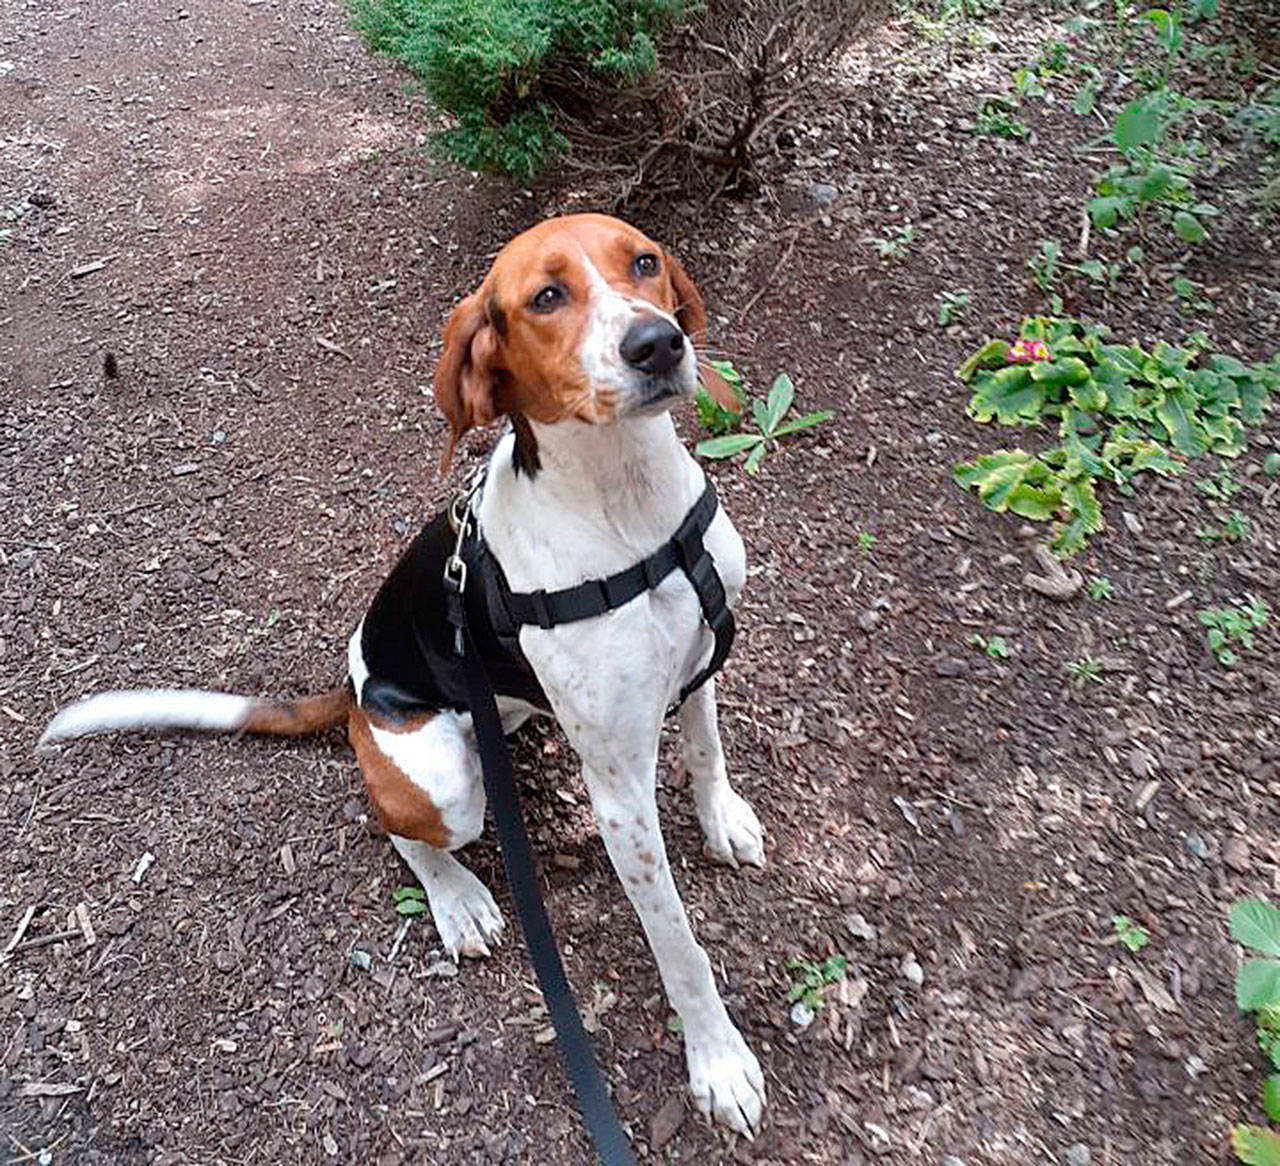 Dixie is a 10-month-old treeing walker coonhound who “is all the very best of her breed … gentle, easy-going, goofy and athletic,” said Welfare For Animal Guild representatives.